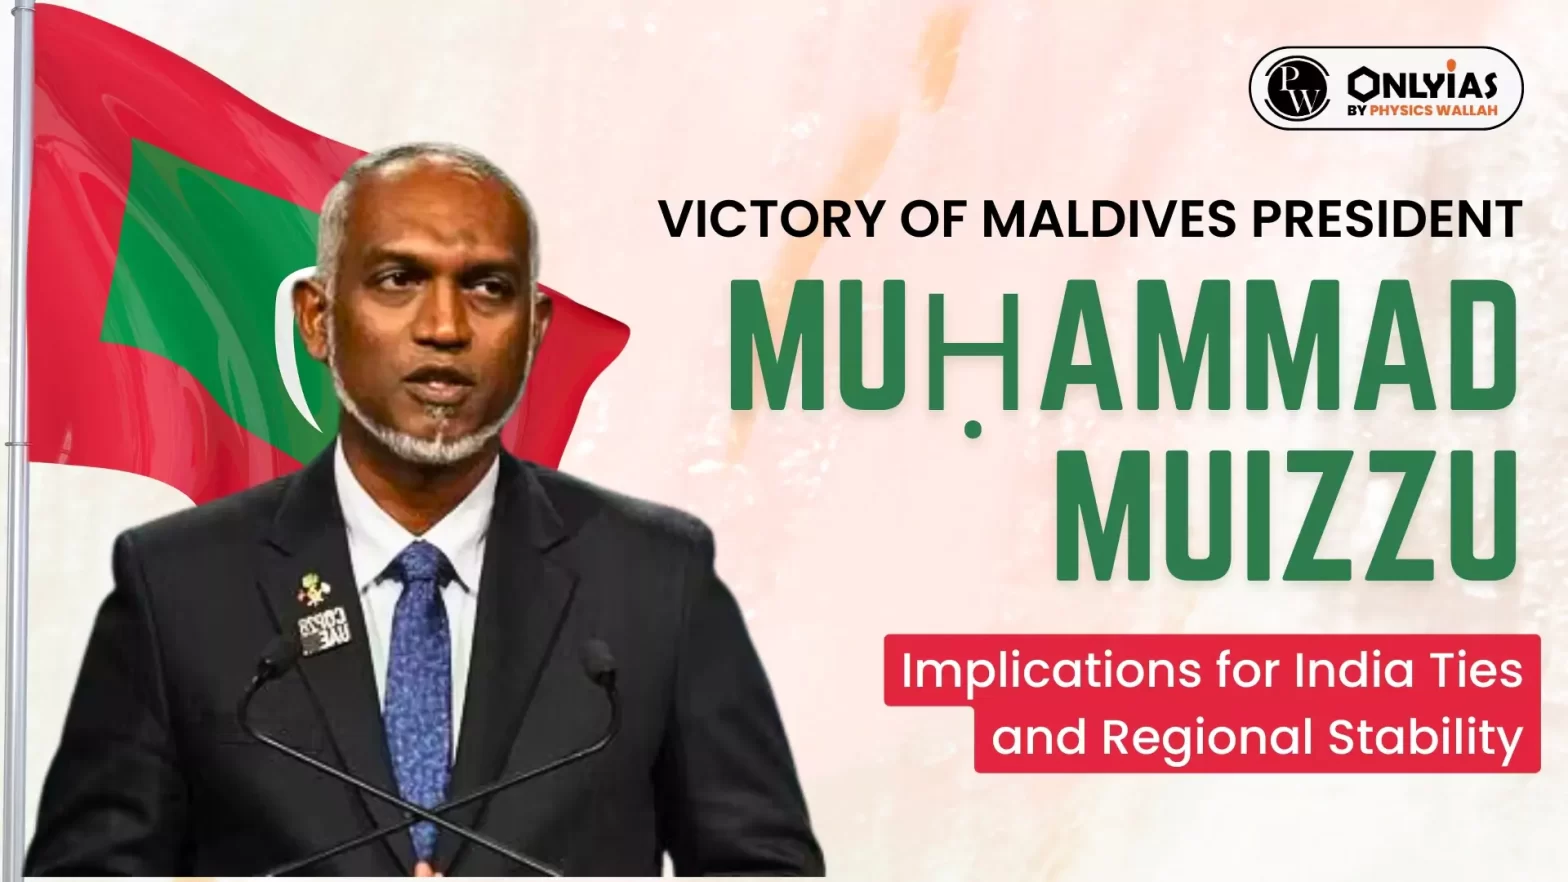 Victory of Maldives President Muḥammad Muizzu: Implications for India Ties and Regional Stability